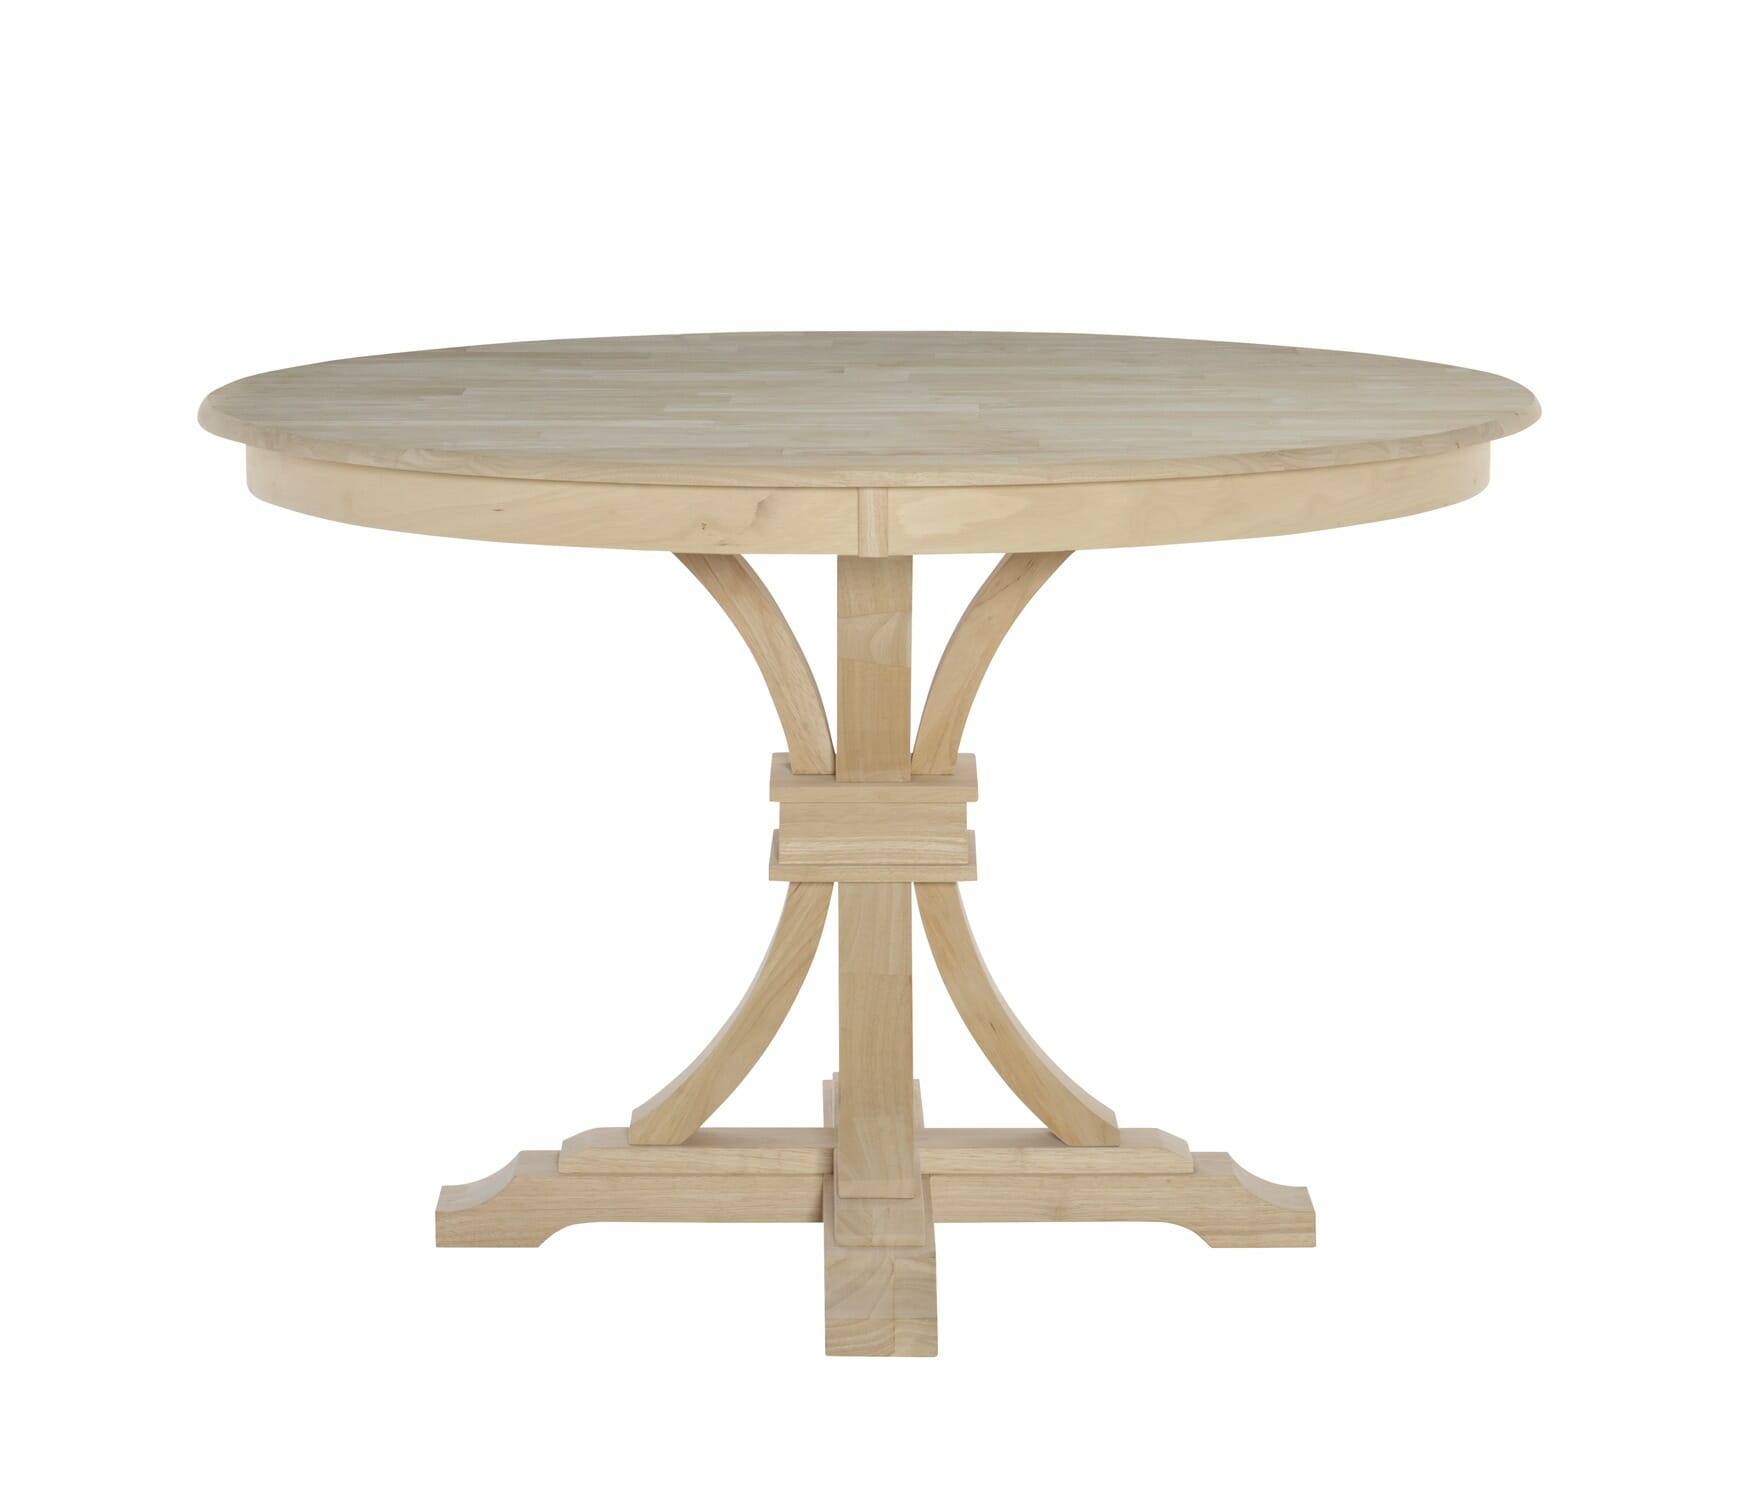 Unfinished Furniture Of Wilmington, 48 Inch Round Dining Table Set With Leaf